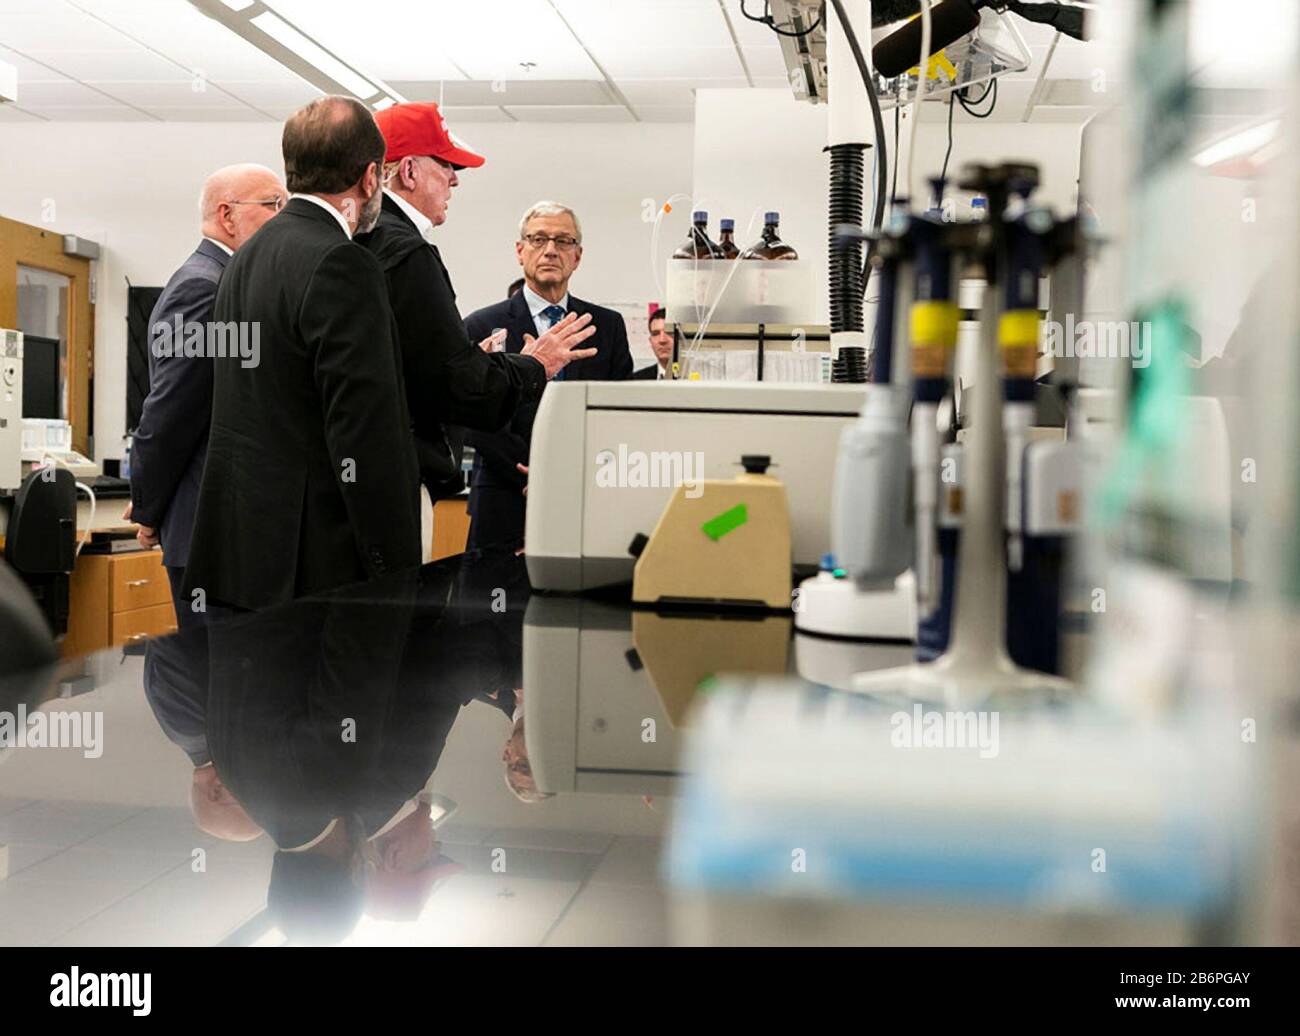 U.S President Donald Trump joined by the Secretary of Health and Human Services Alex Azar, left, and Director of Centers for Disease Control and Prevention Dr. Robert Redfield, right, speaks with reporters during a visit to the Centers for Disease Control and Prevention March 6, 2020 in Atlanta, Georgia. Stock Photo